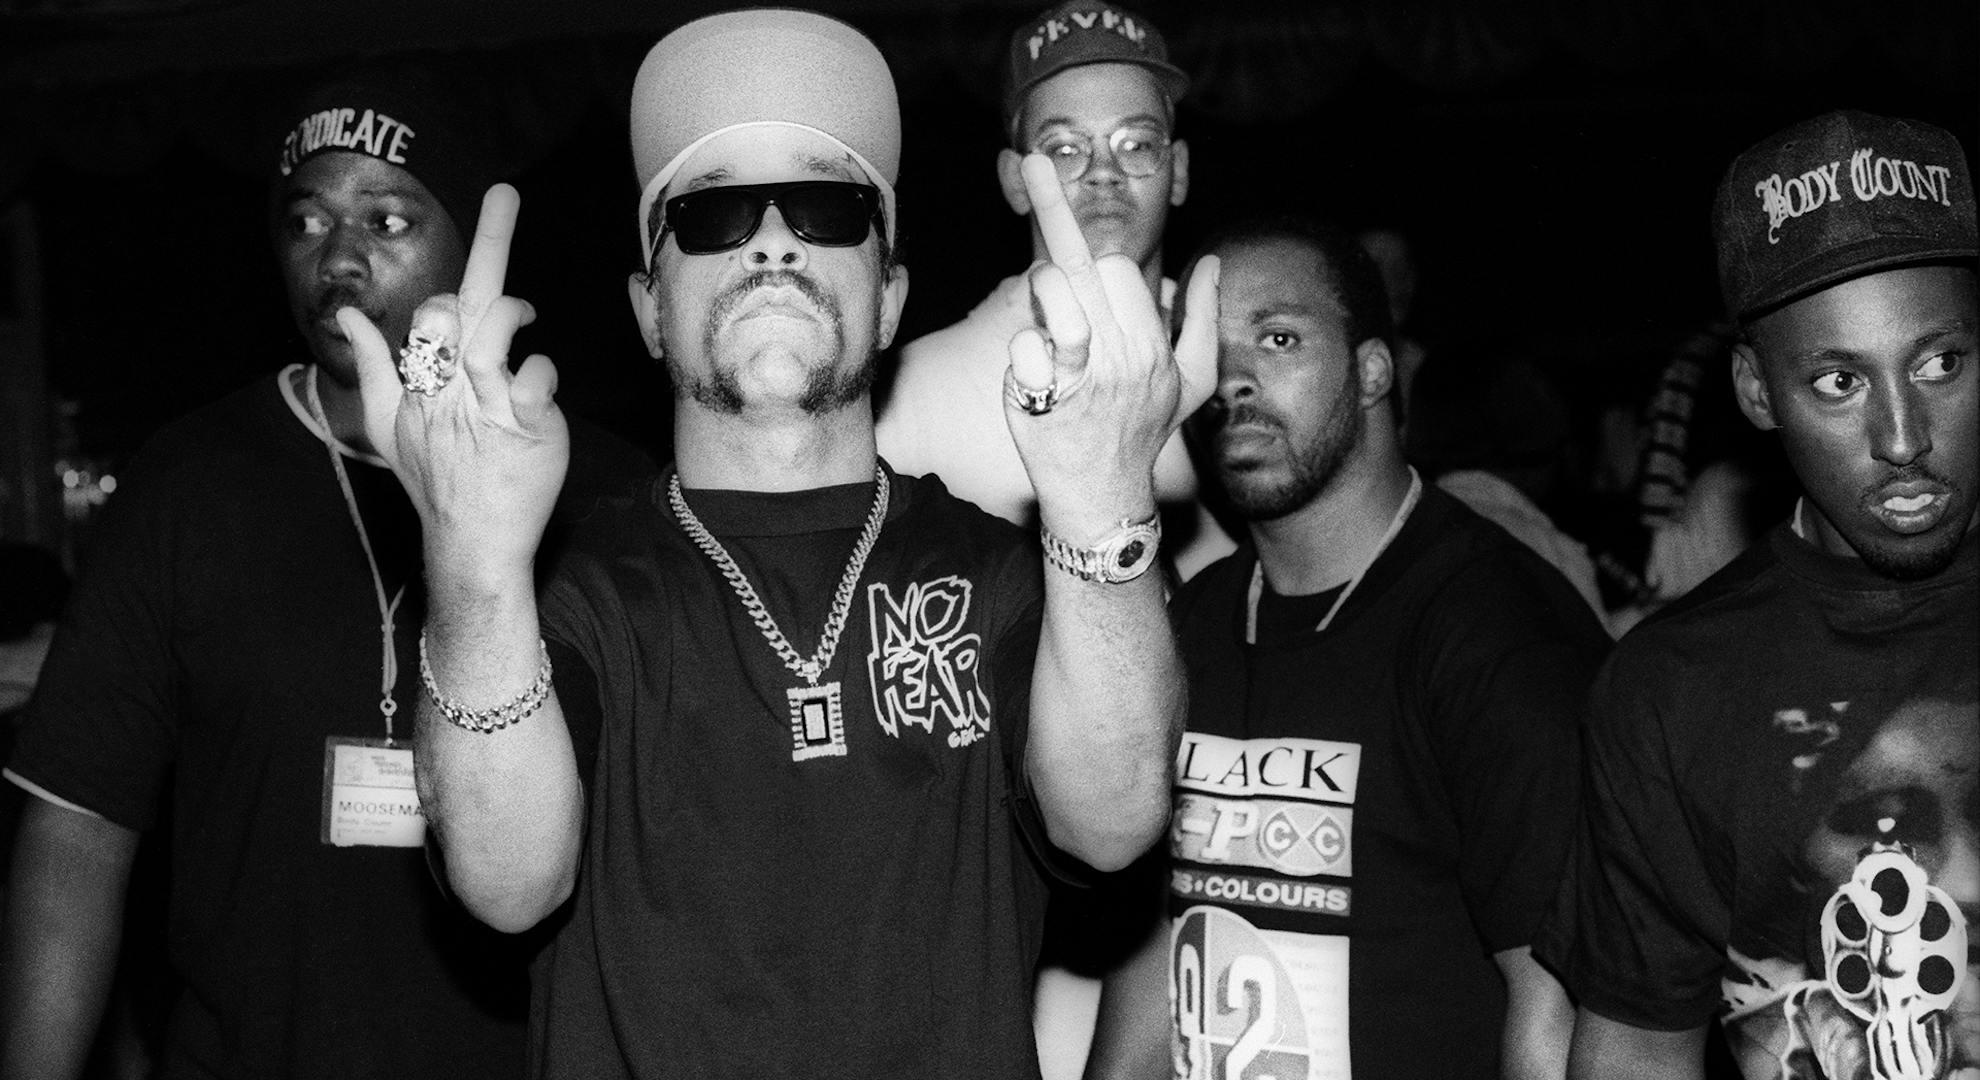 Rapper Ice-T gives a "middle finger" obscene gesture when he and Body Count watch a show at The Ritz on June 19, 1992 in New York City. 